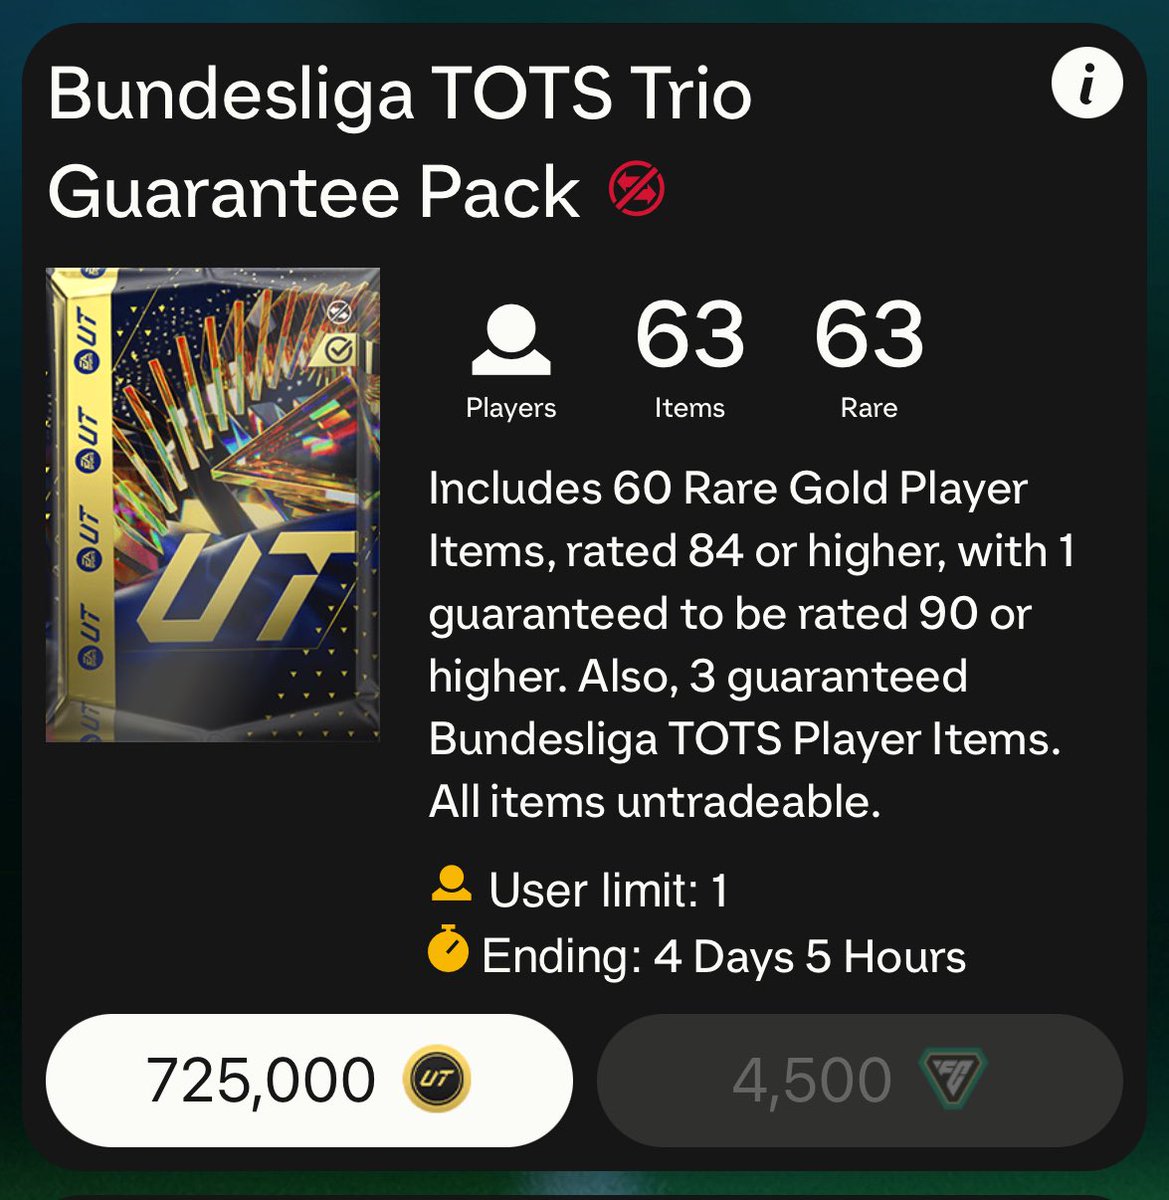 If you’d like to open the Bundesliga TOTS Trio Guarantee pack, just like and comment your platform ✅

Must be following so I can DM 🤝